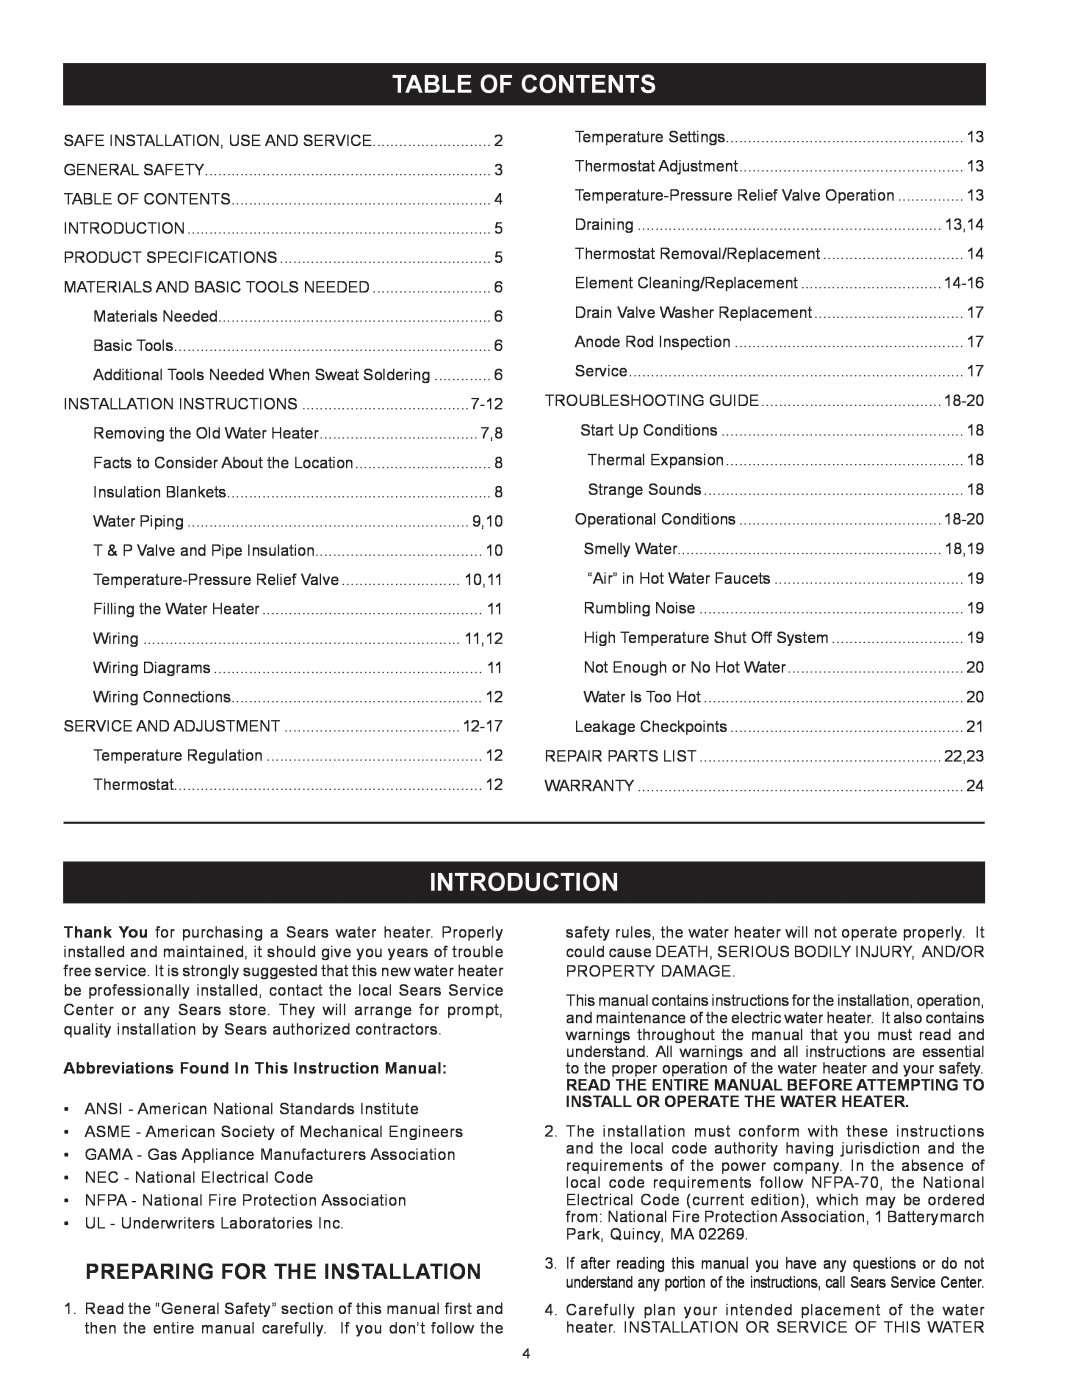 Kenmore 153.31604 owner manual Table Of Contents, Introduction, Preparing for the Installation 